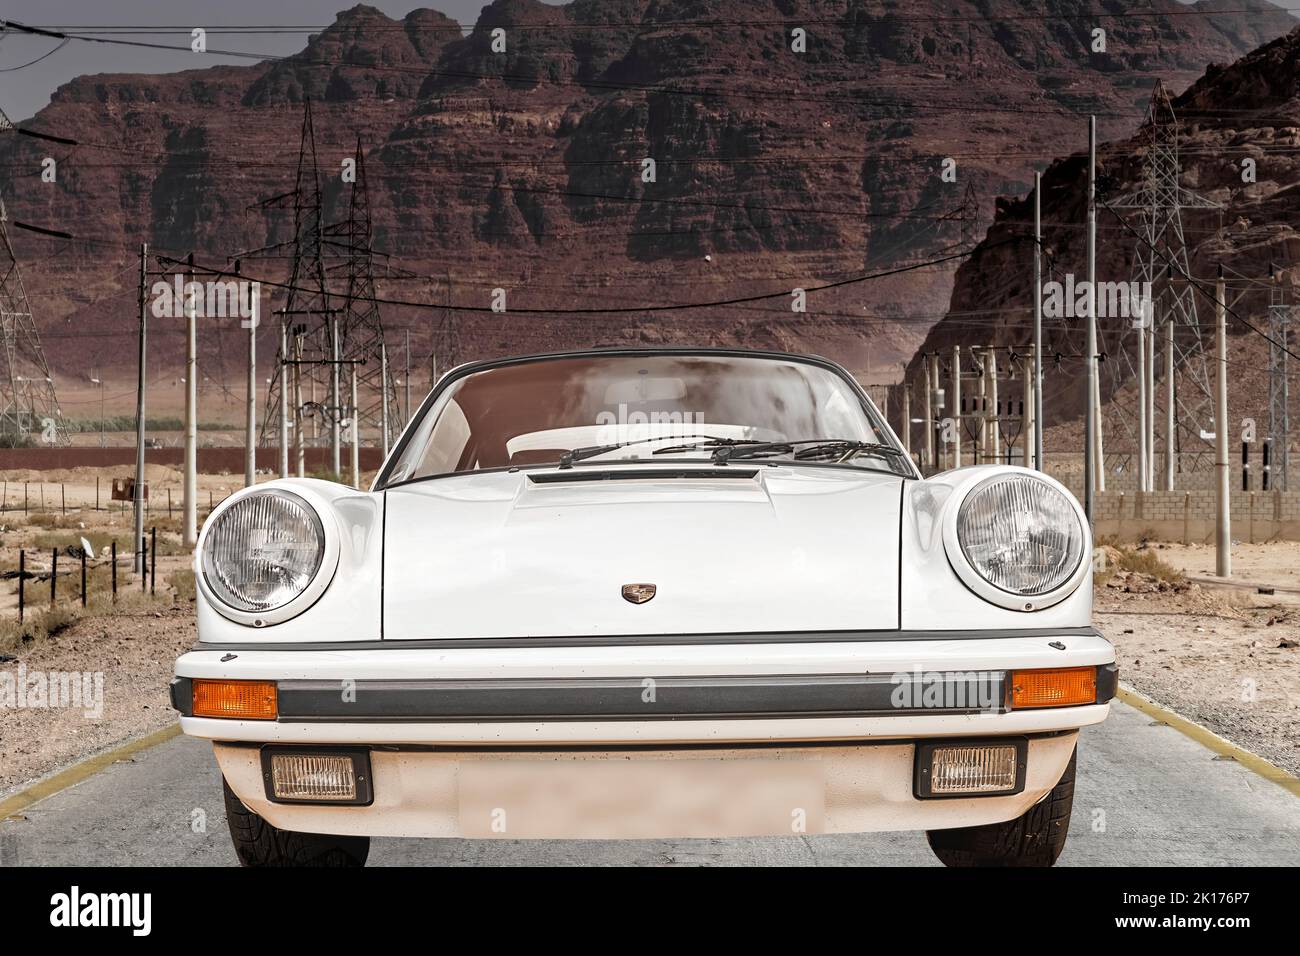 Porsche 911 targa, front view of the German sports car on a road near a substation in the mountains of Jordan, vehicle location Lehnin, Germany, Septe Stock Photo